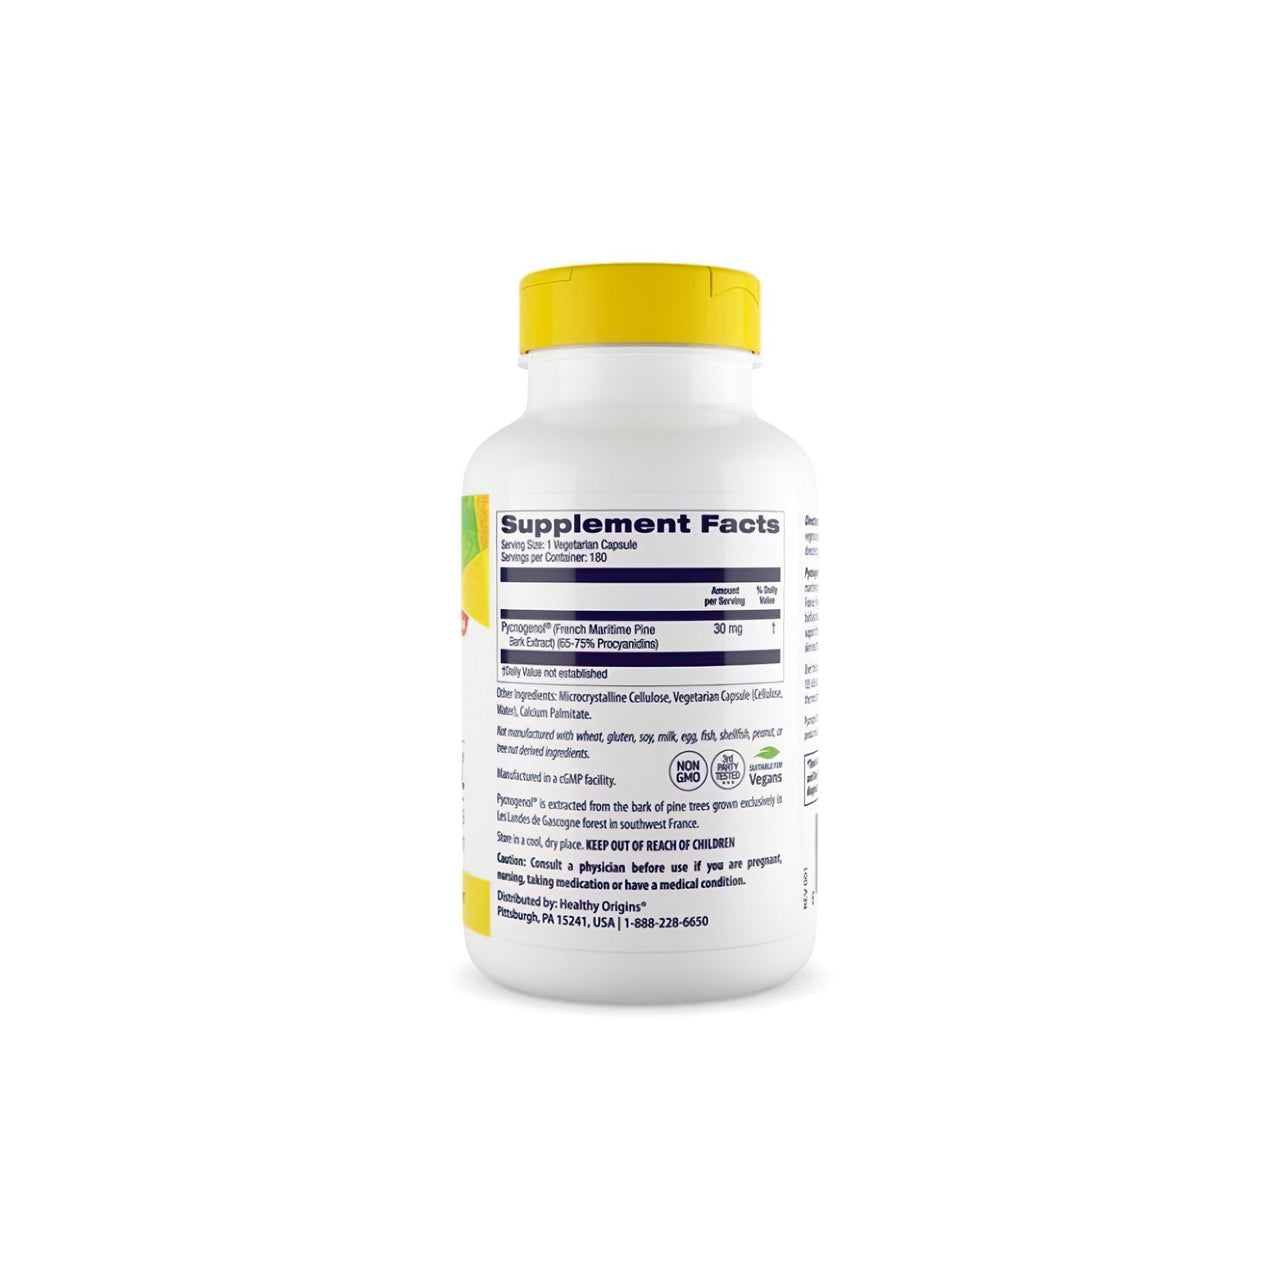 A dietary supplement bottle of Pycnogenol 30 mg 180 vege capsules, a powerful antioxidant for cardiovascular health, showcased on a clean white background, by Healthy Origins.